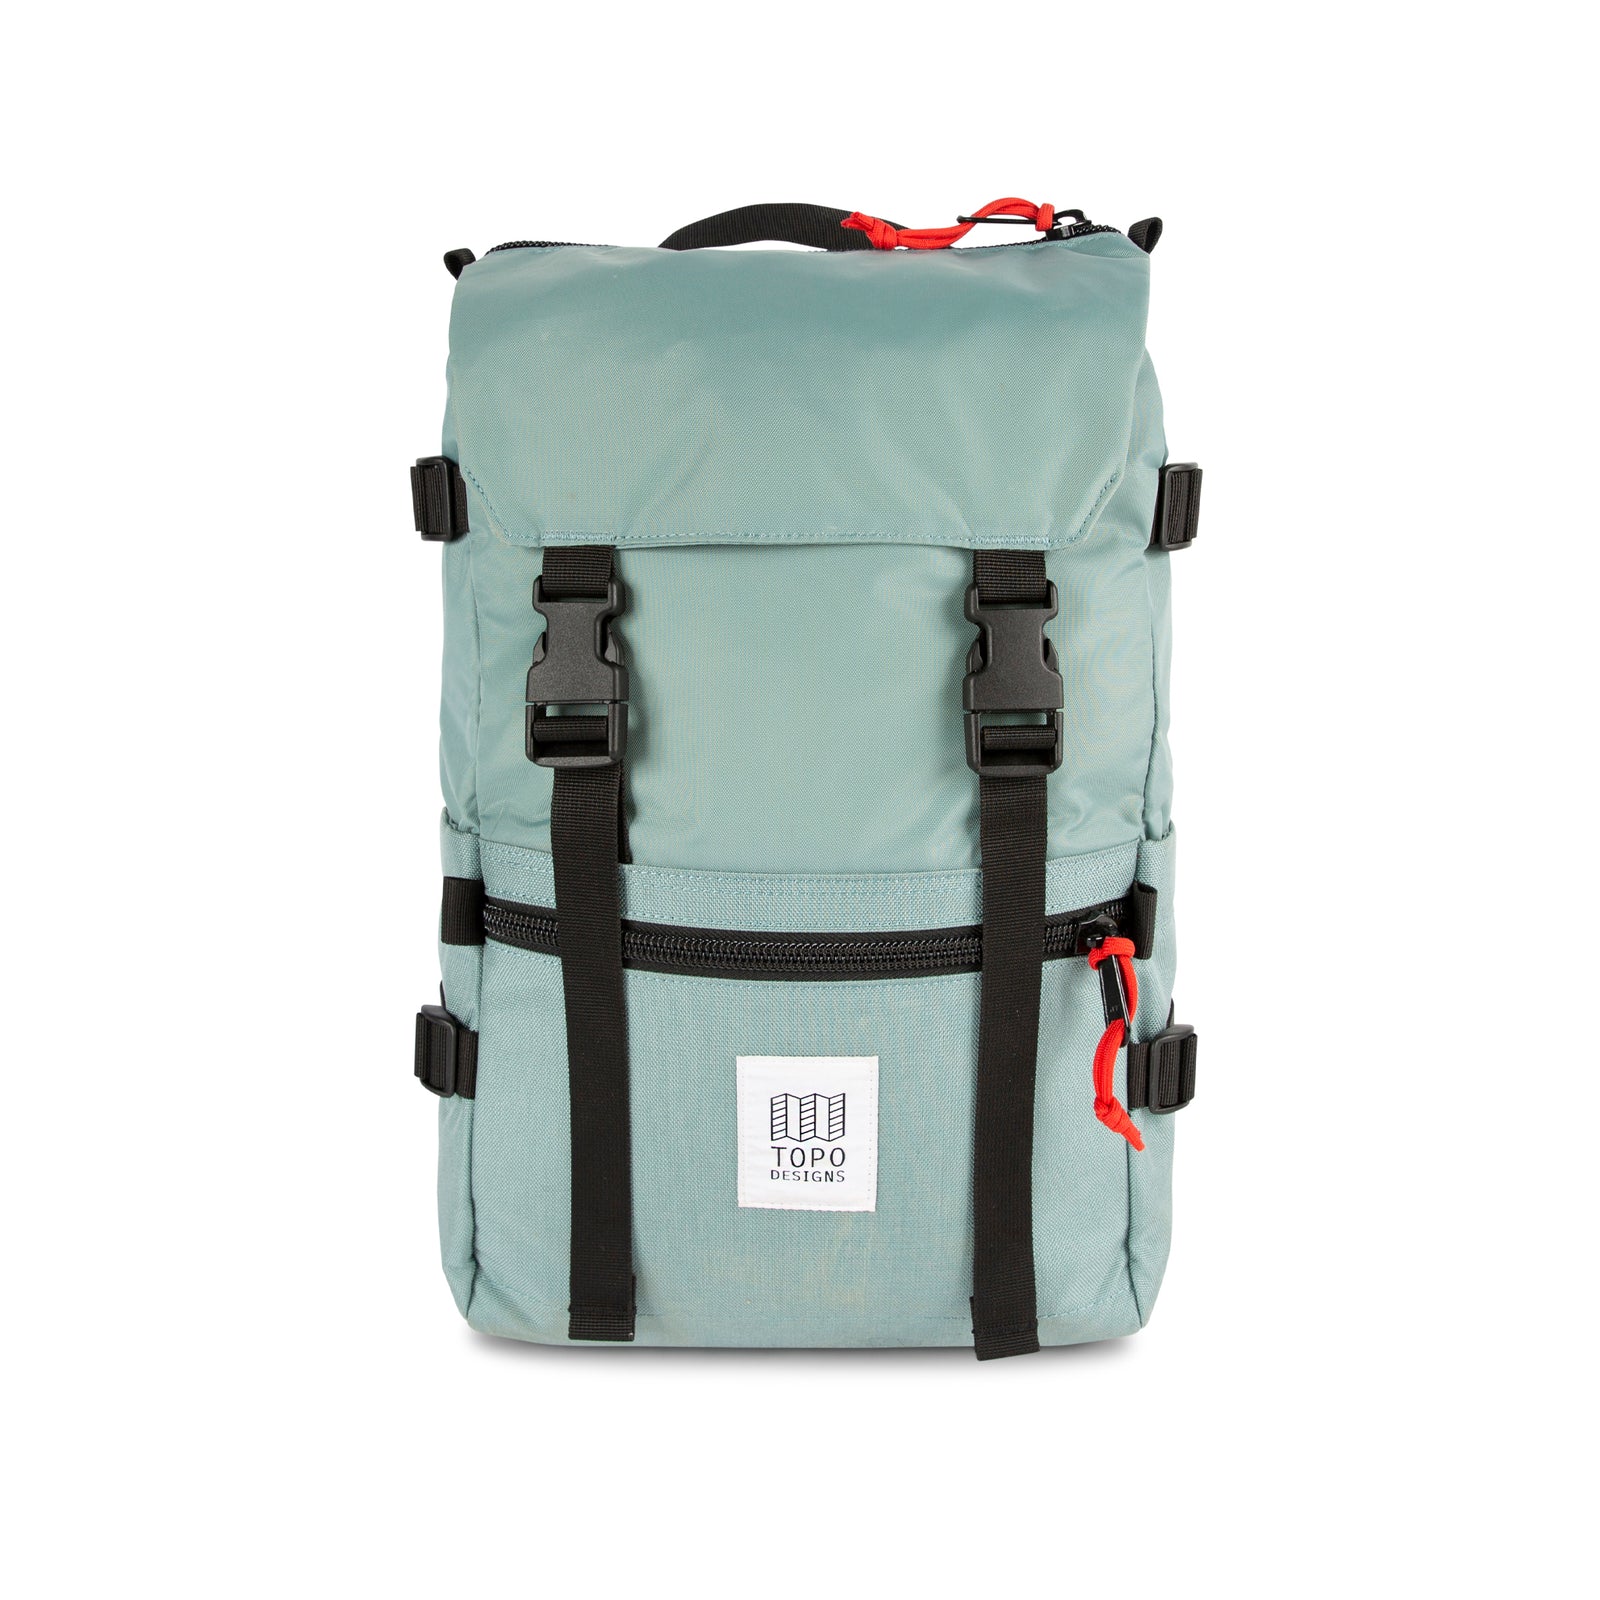 Topo Designs Rover Pack Classic laptop backpack in "Sage" green.